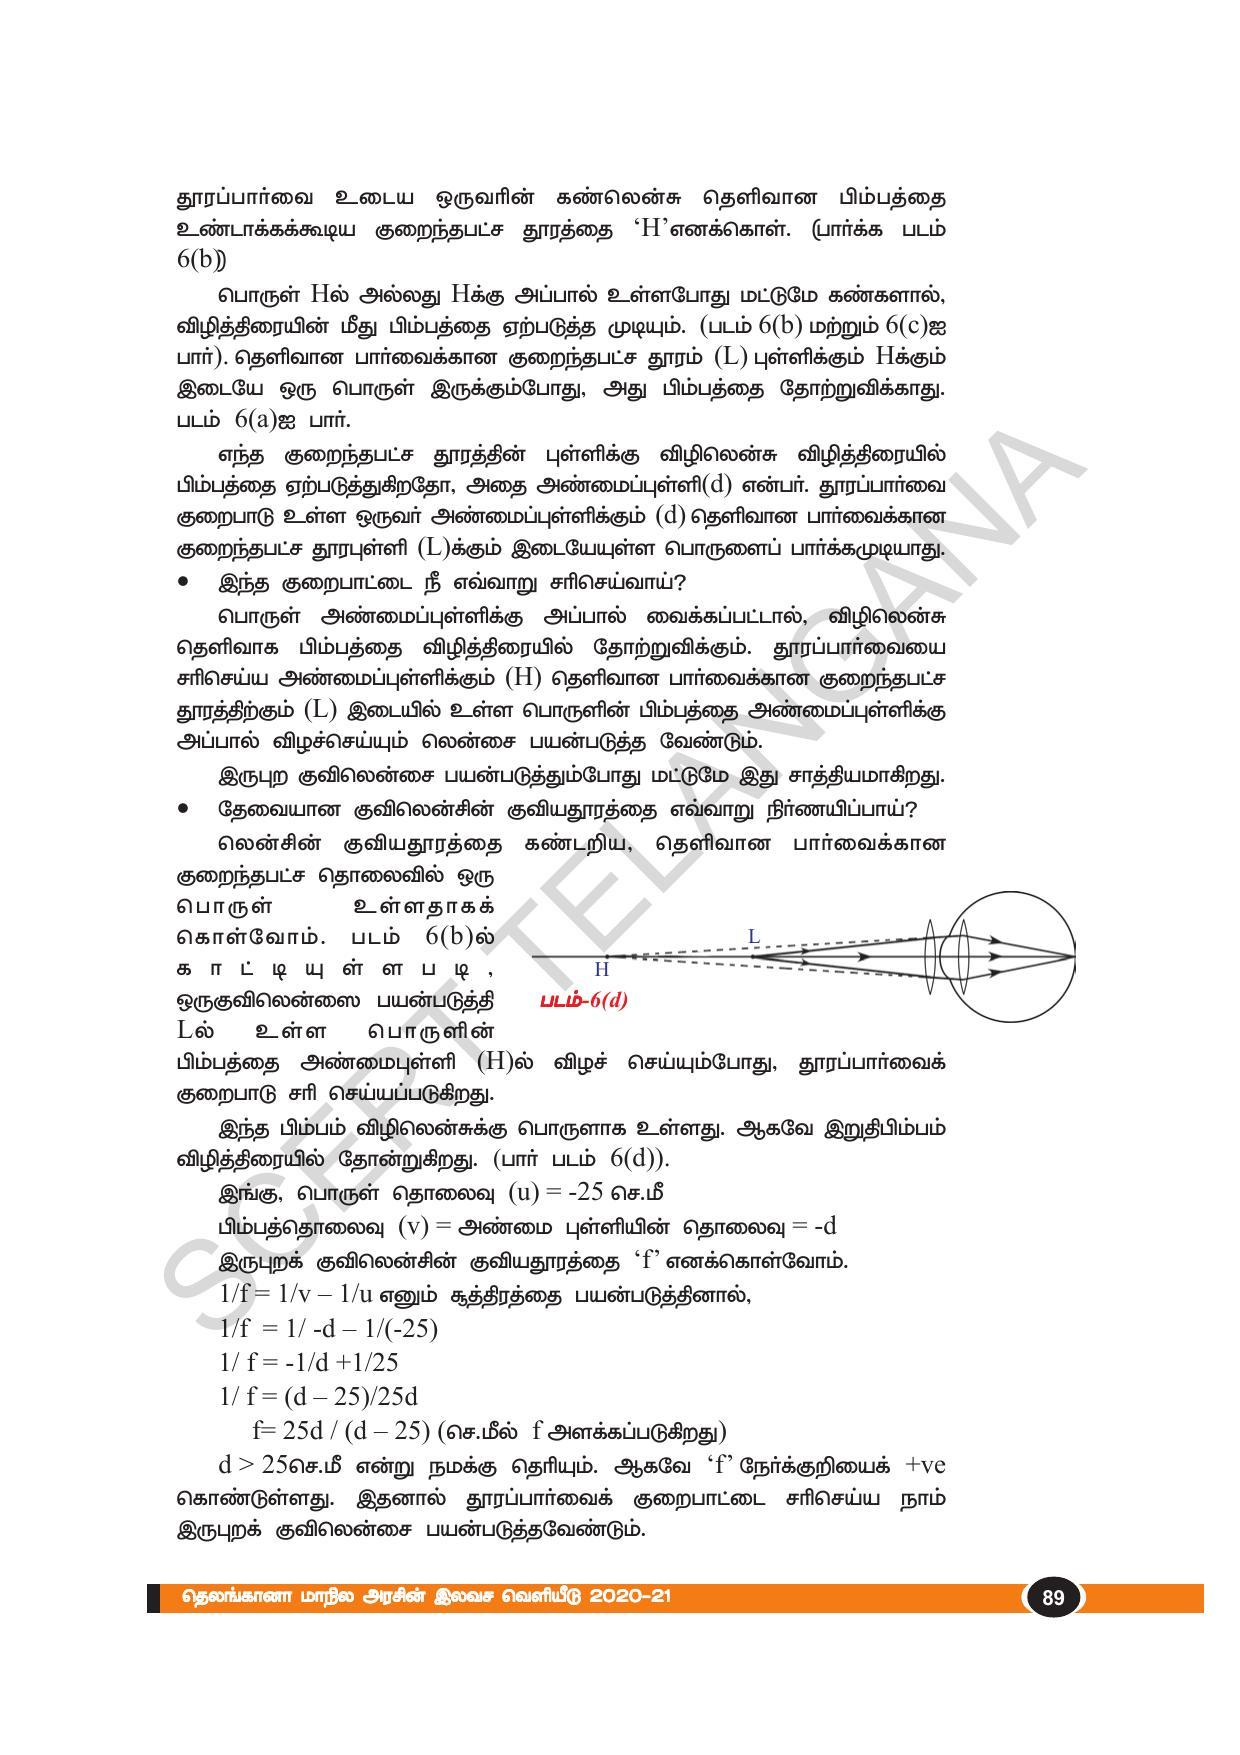 TS SCERT Class 10 Physical Science(Tamil Medium) Text Book - Page 101